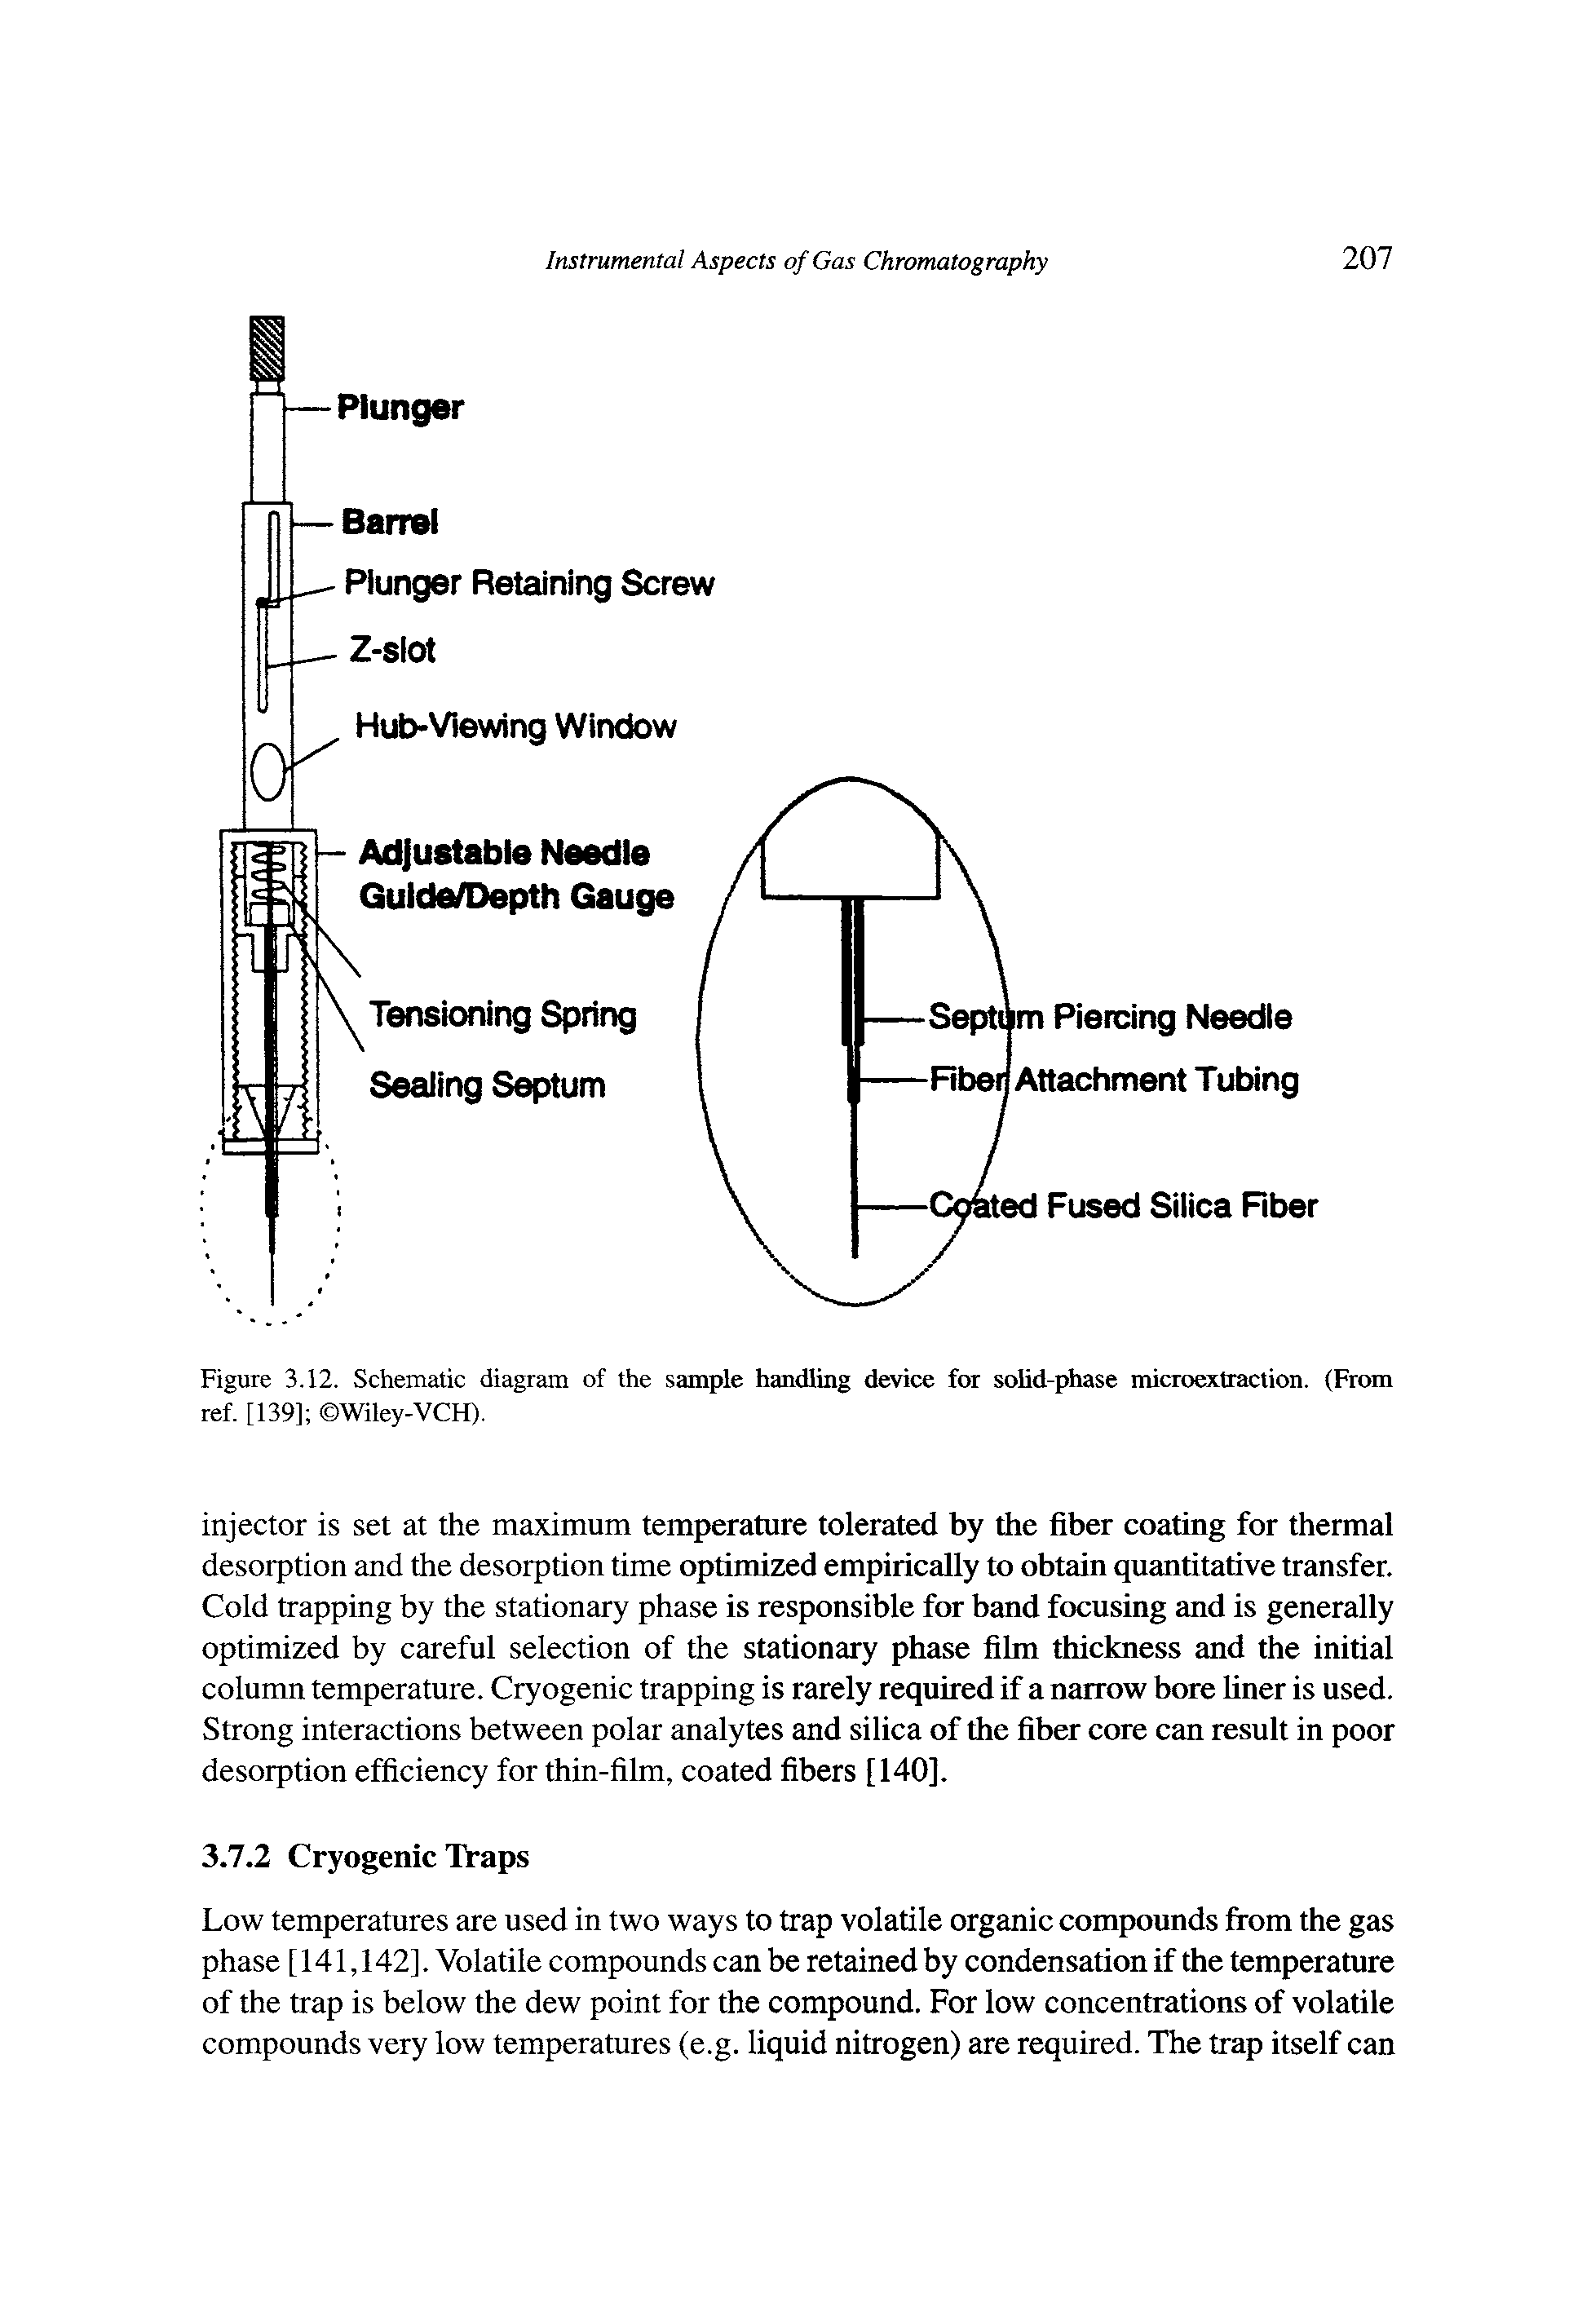 Figure 3.12. Schematic diagram of the sample handling device for solid-phase microextraction. (From ref. [139] Wiley-VCH).